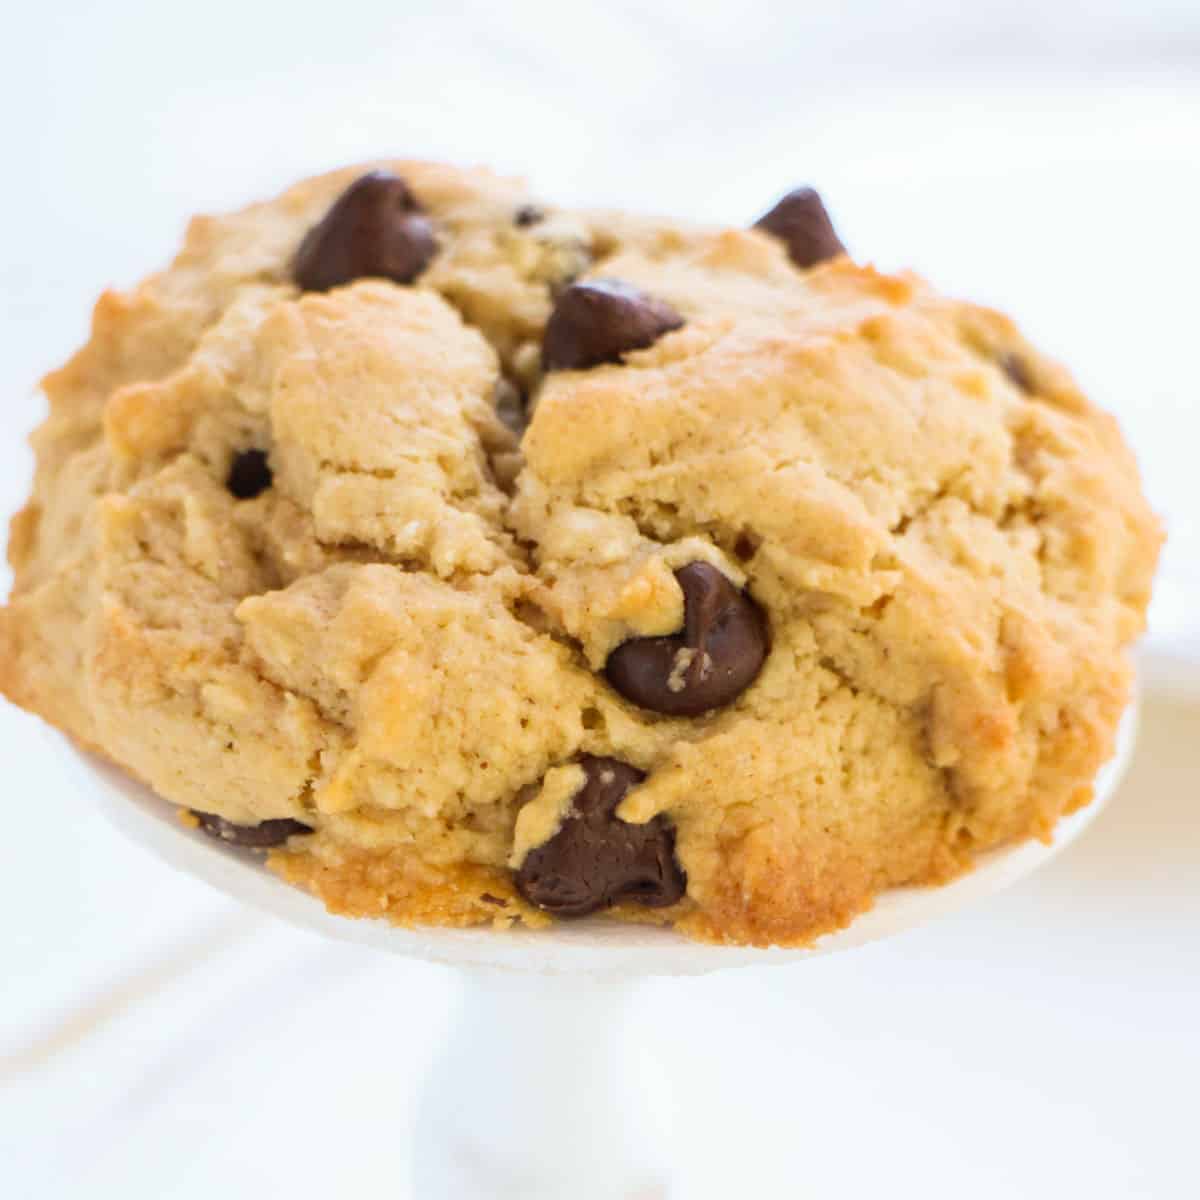 https://brooklynfarmgirl.com/wp-content/uploads/2016/04/Single-Serving-Chocolate-Chip-Cookie-Featured-Image-1200.jpg